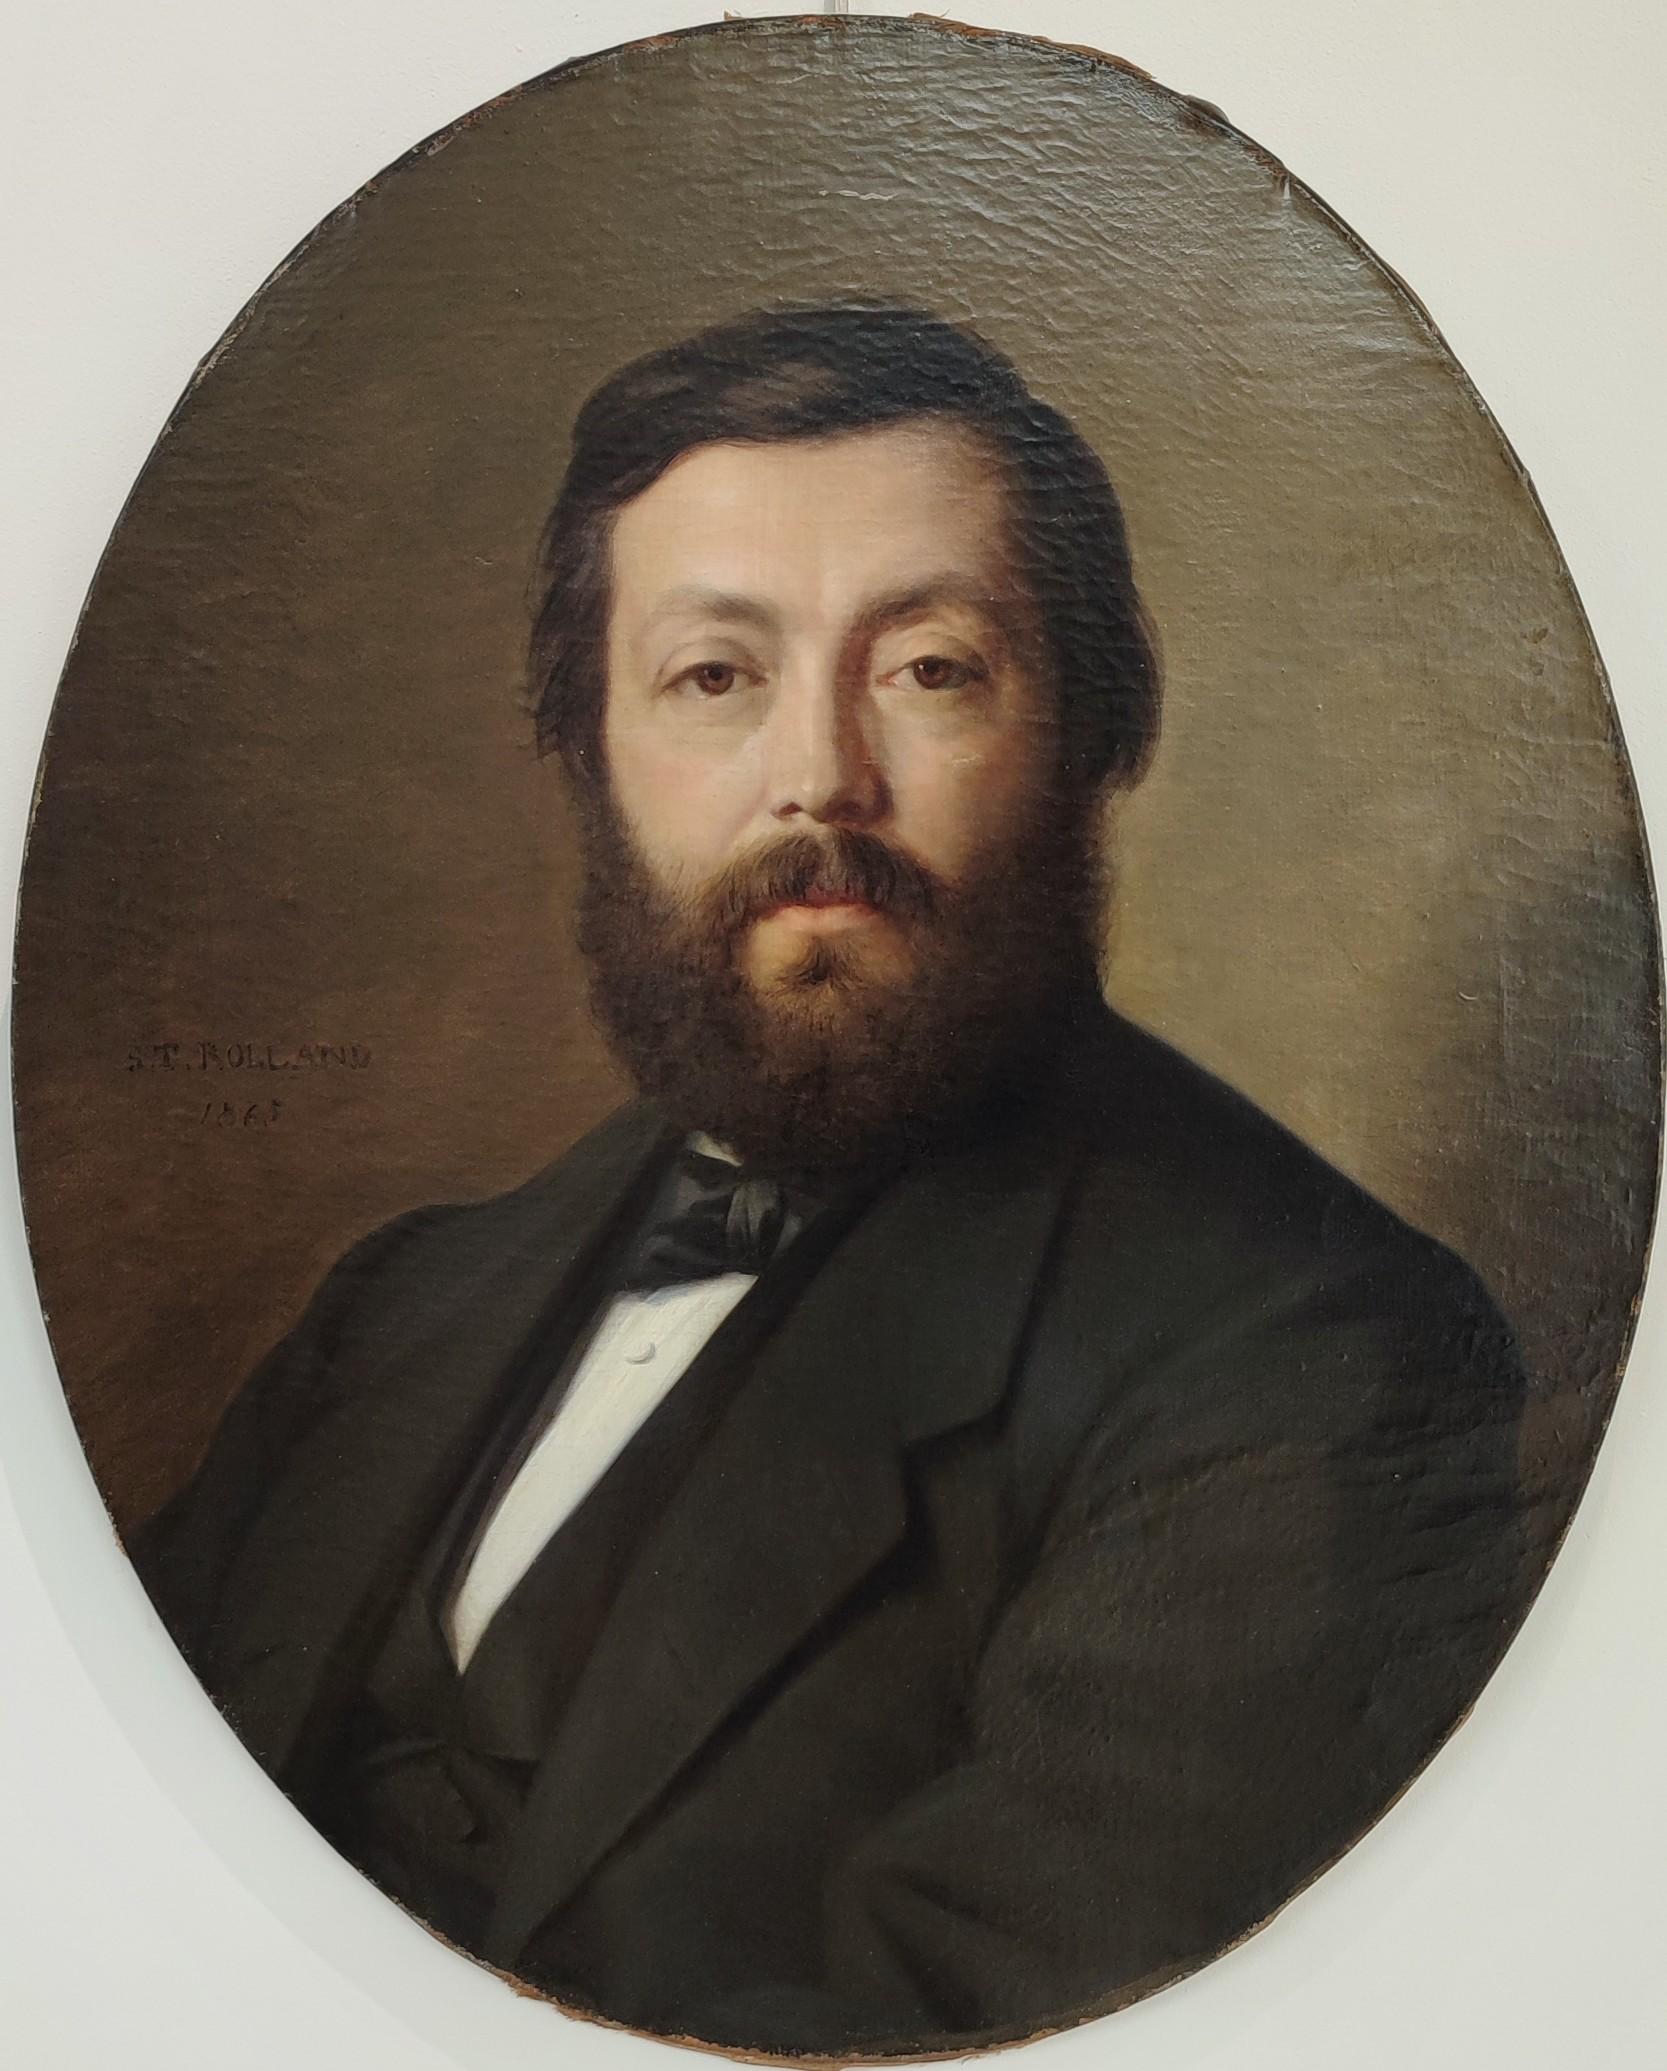 Scipion Rolland Portrait Painting - Bearded man in suit and bow tie